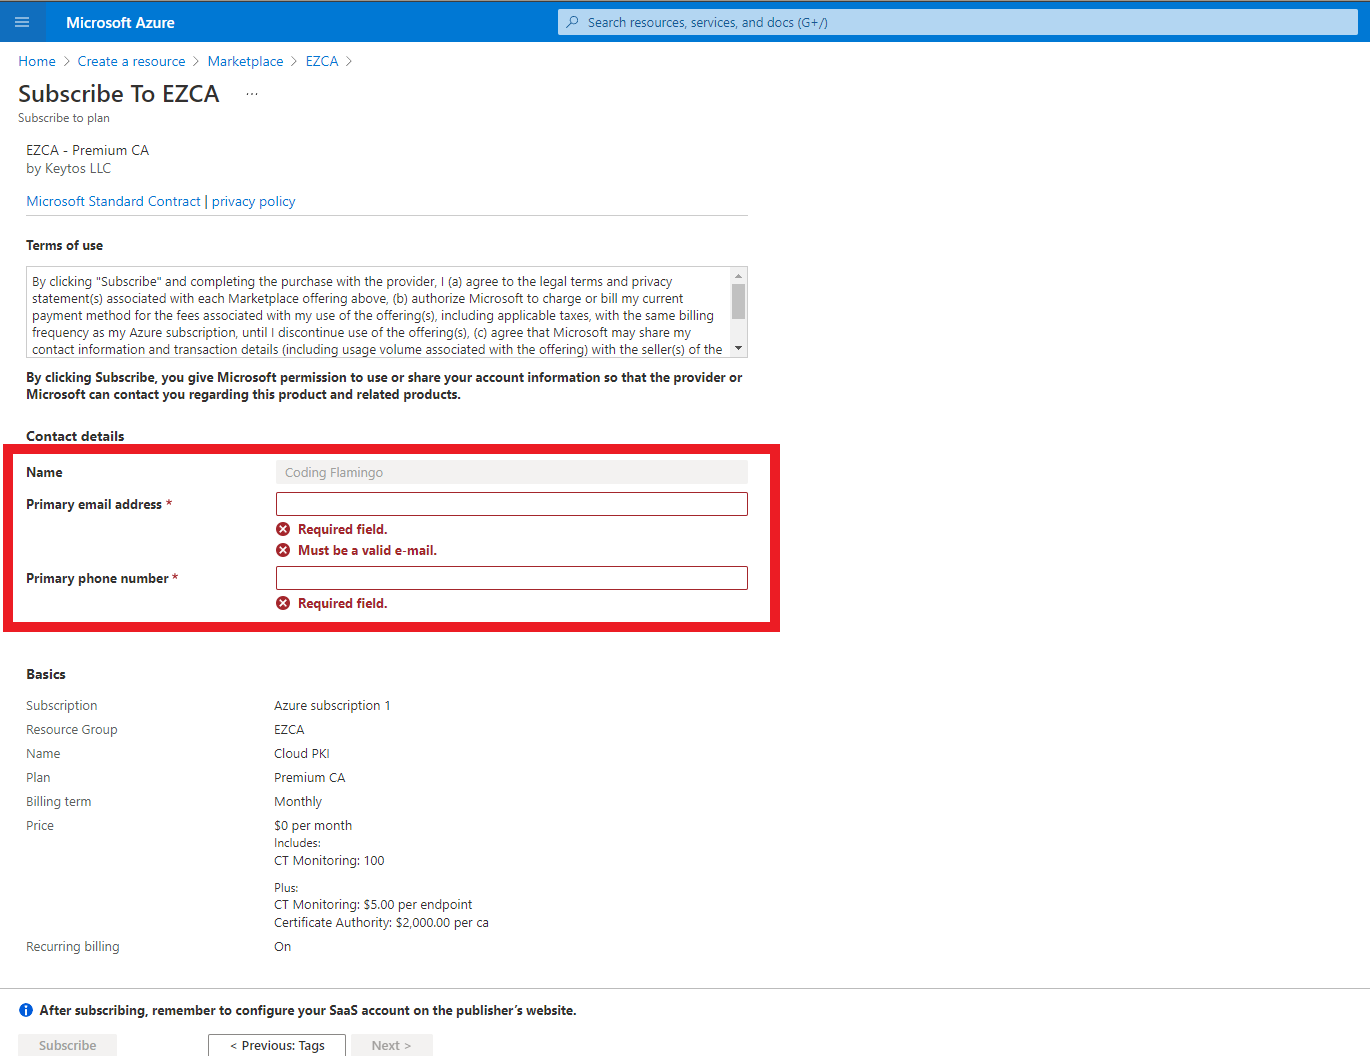 Enter details for Azure Certificate Authority